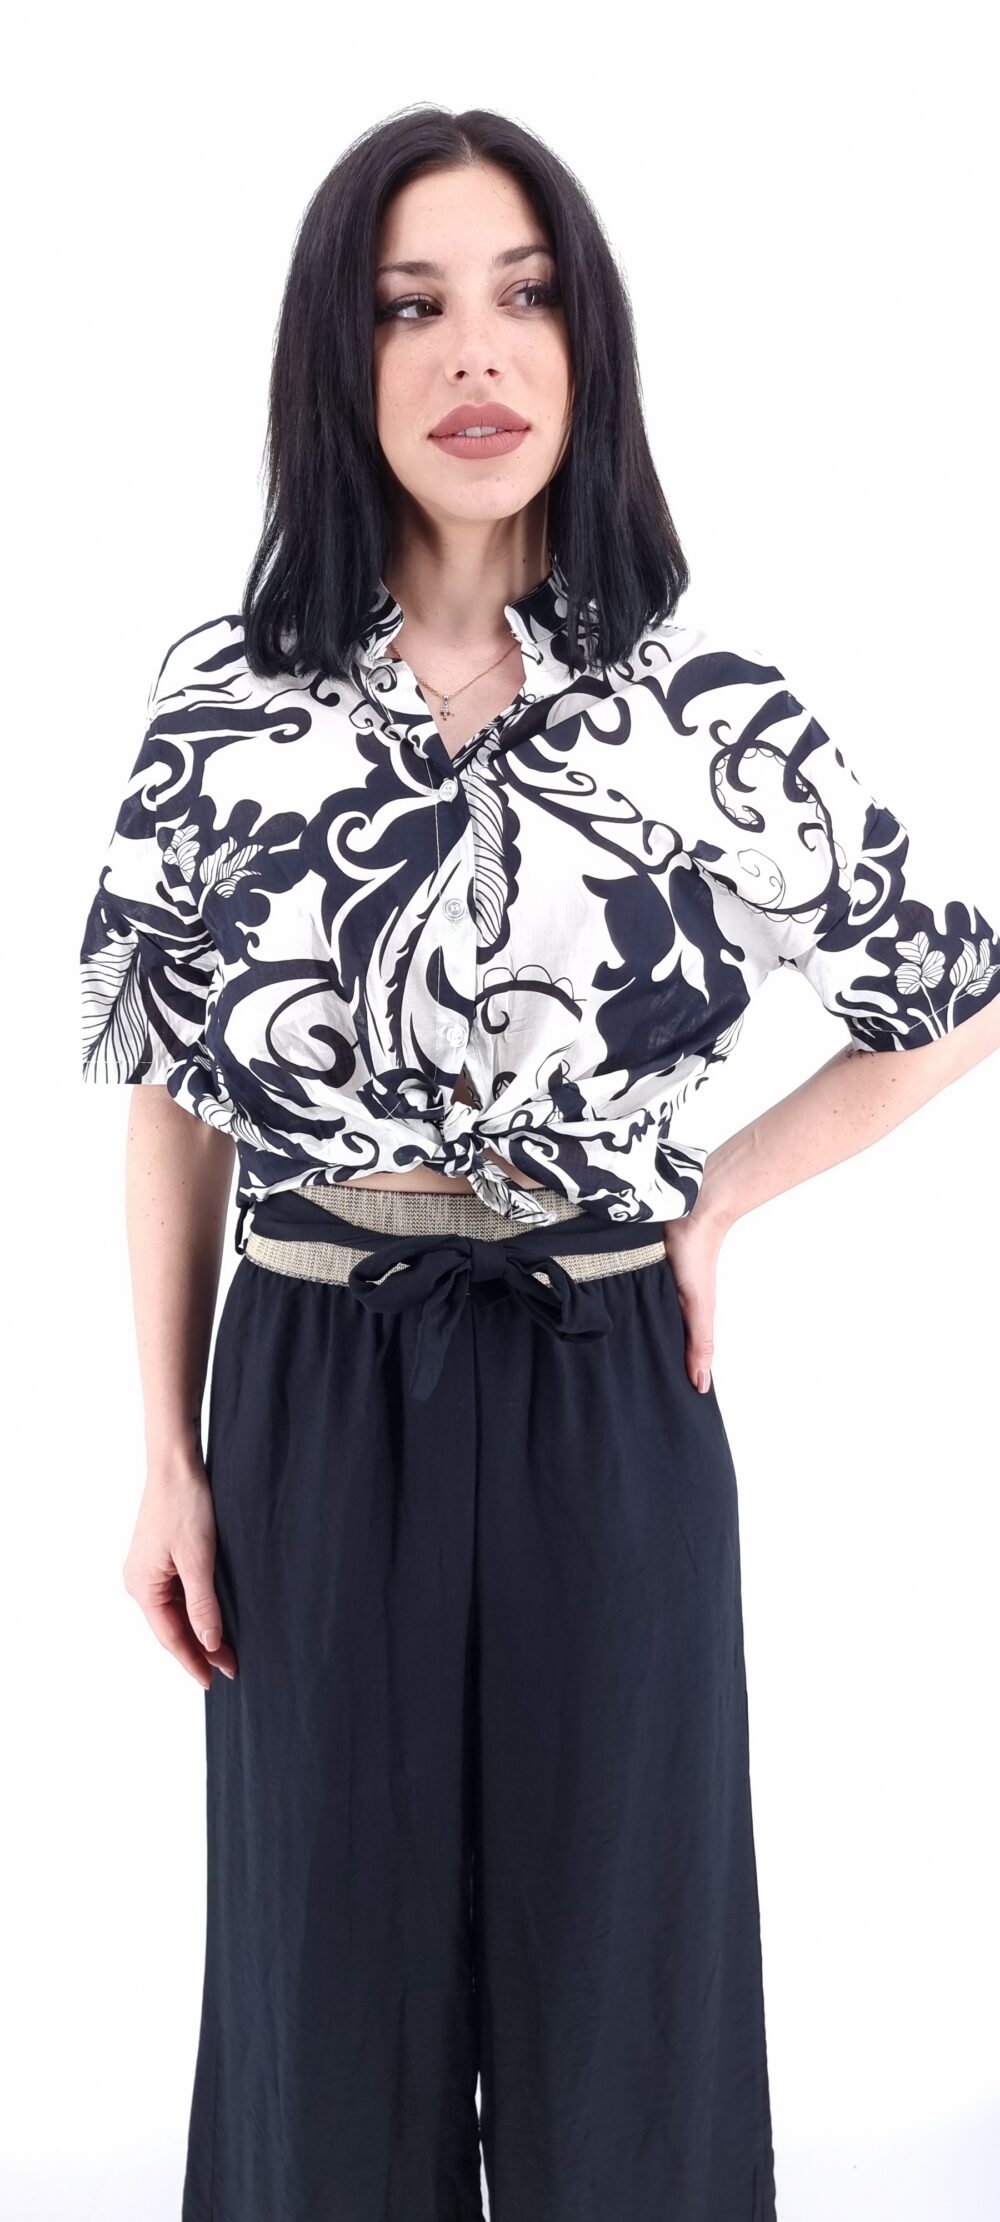 Printed shirt with short sleeves black and white